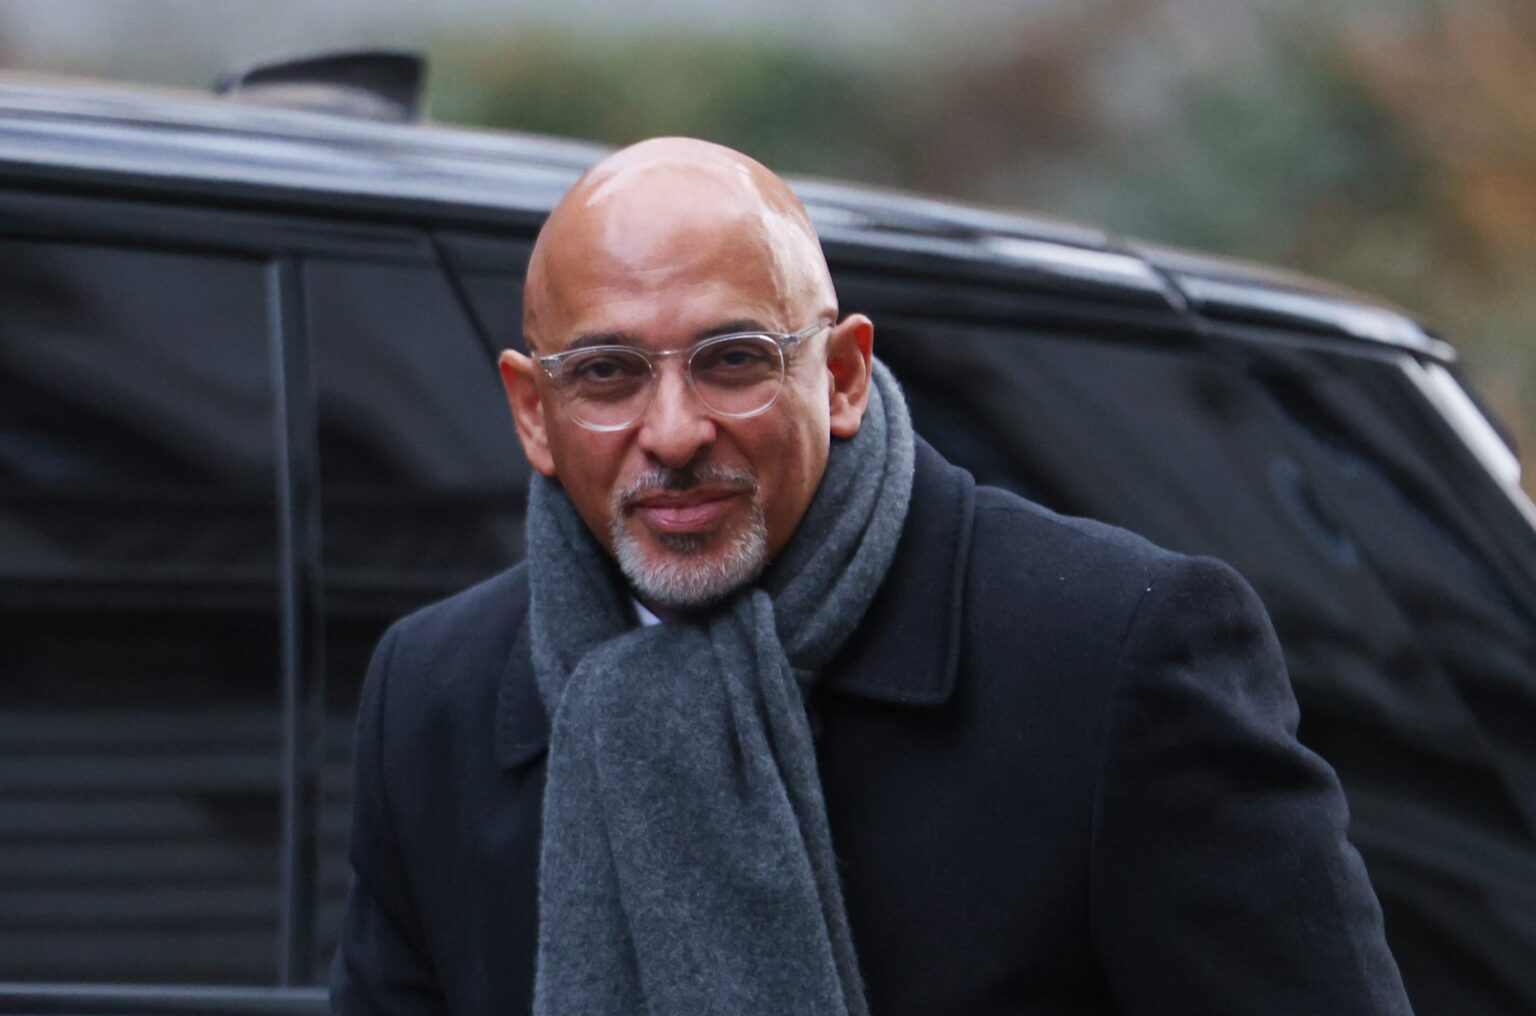 Former Tory leader warns Nadhim Zahawi to clear up tax row as questions remain